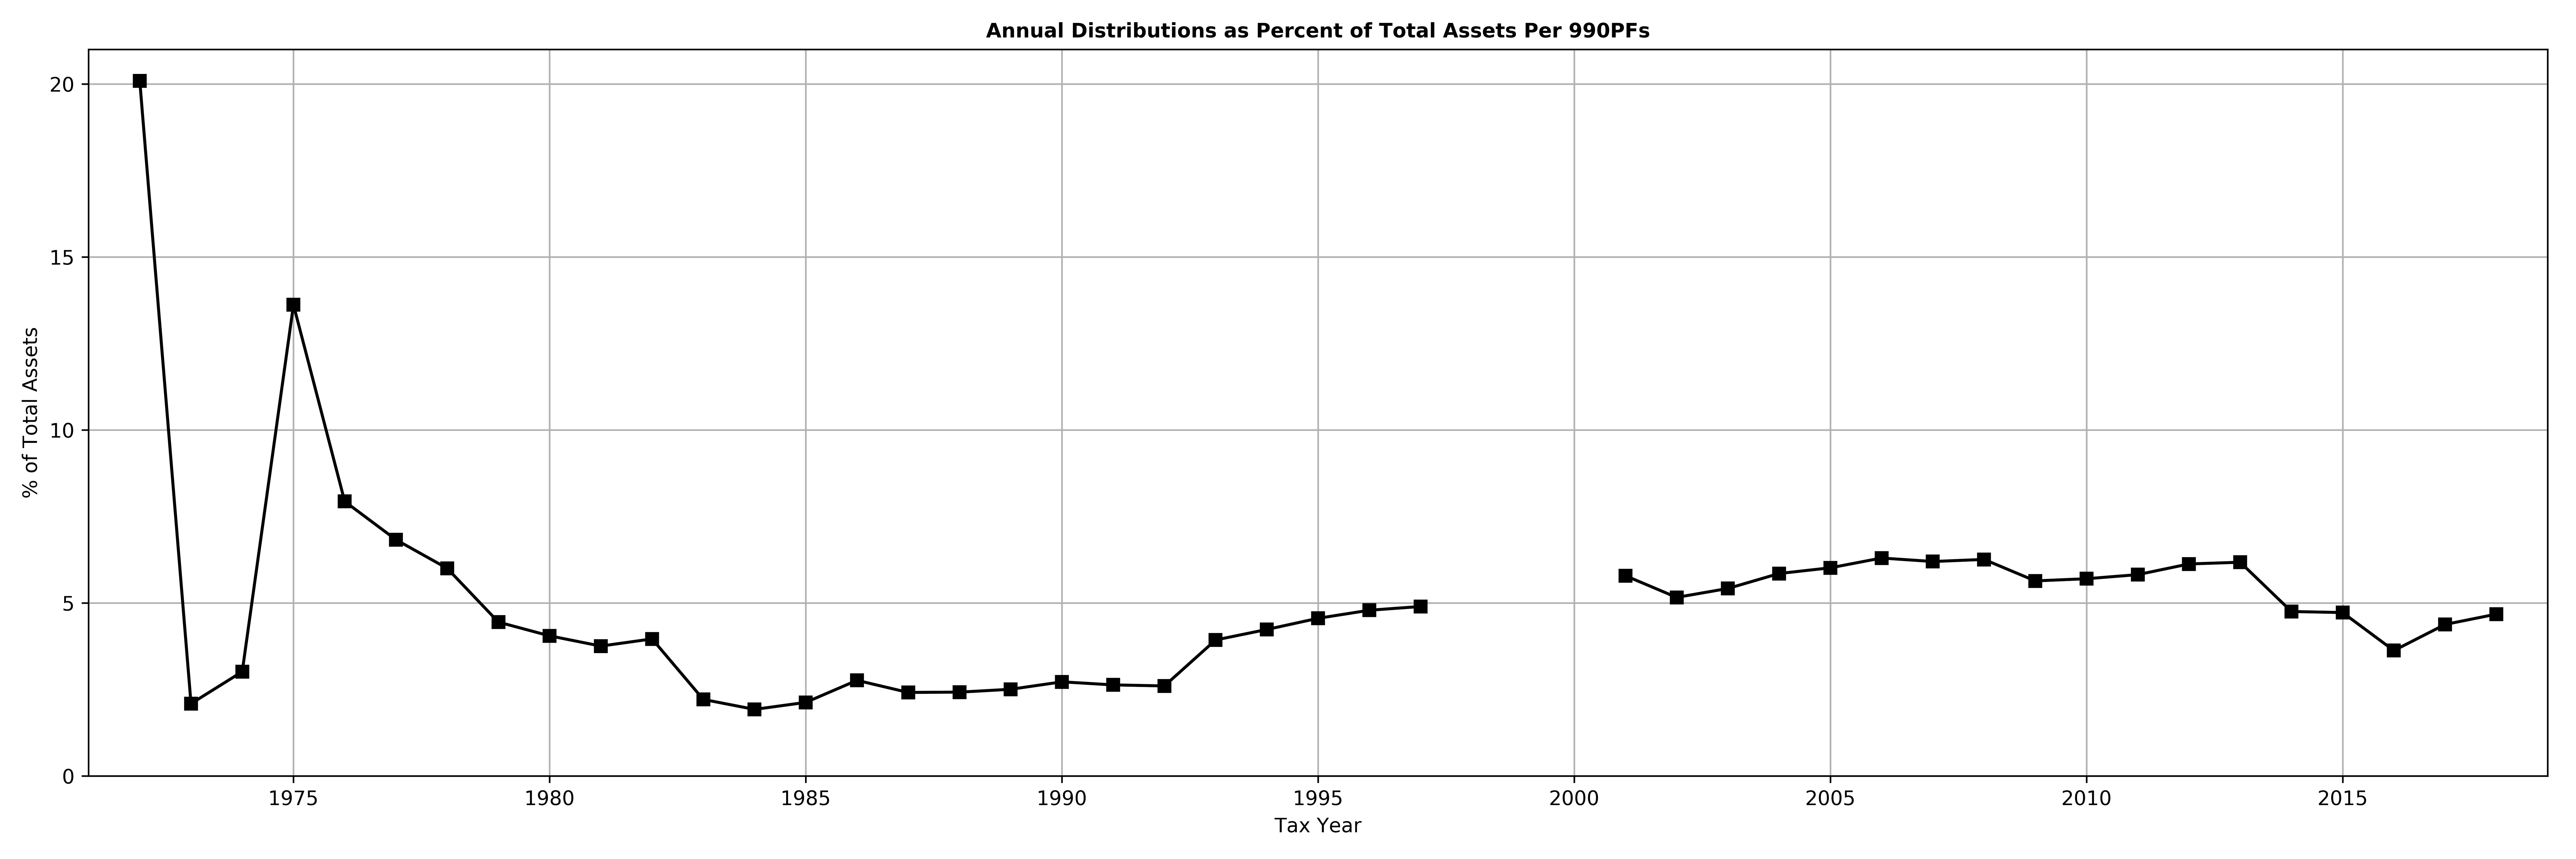 Distributions as Percent of Assets